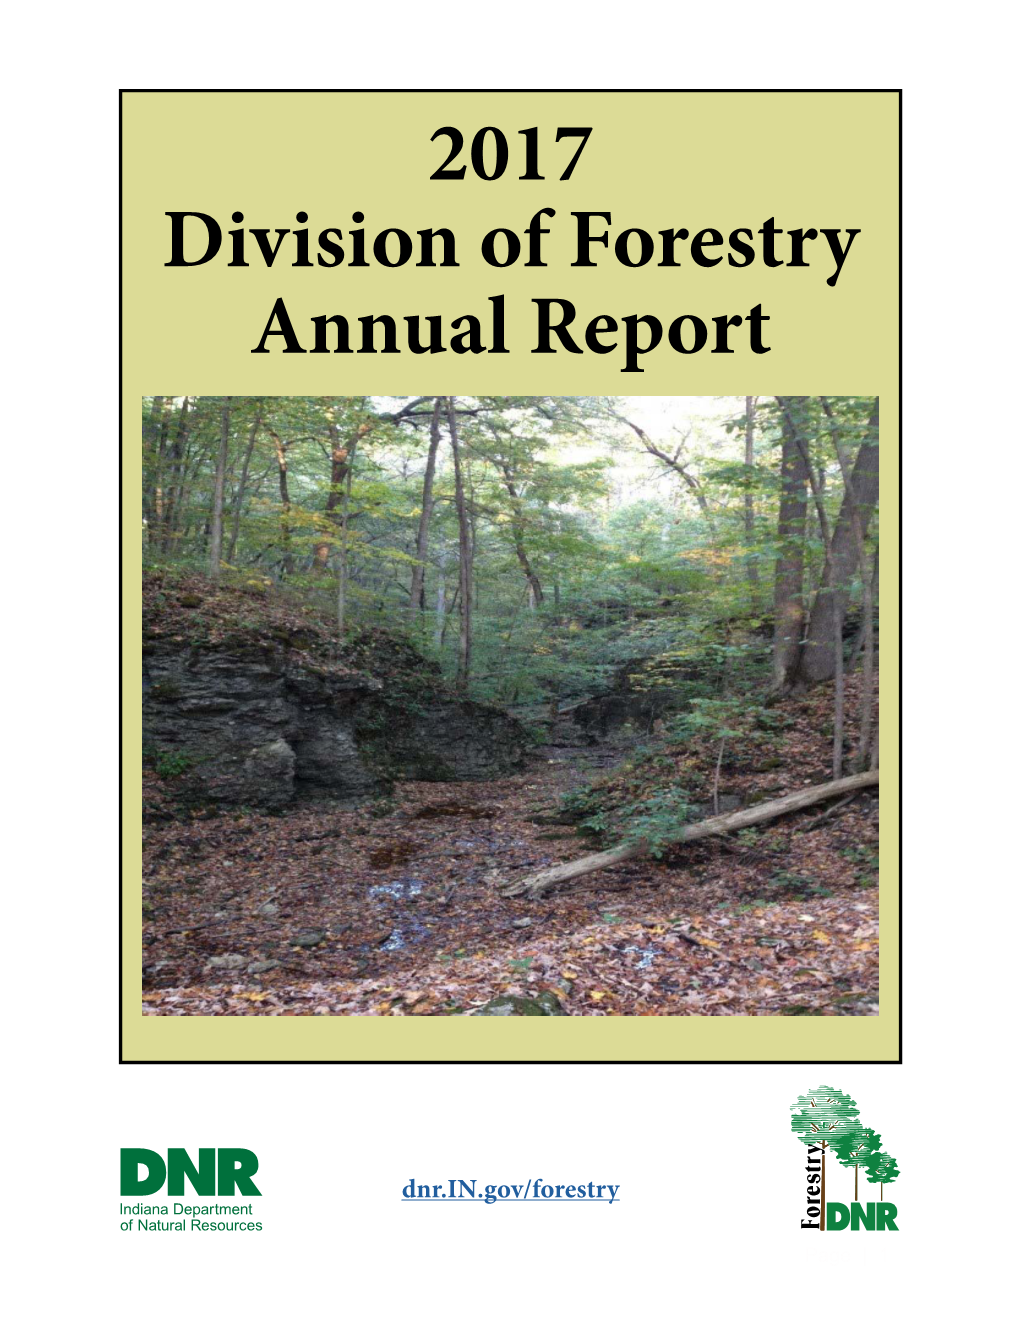 Indiana DNR Division of Forestry 2018 Annual Report